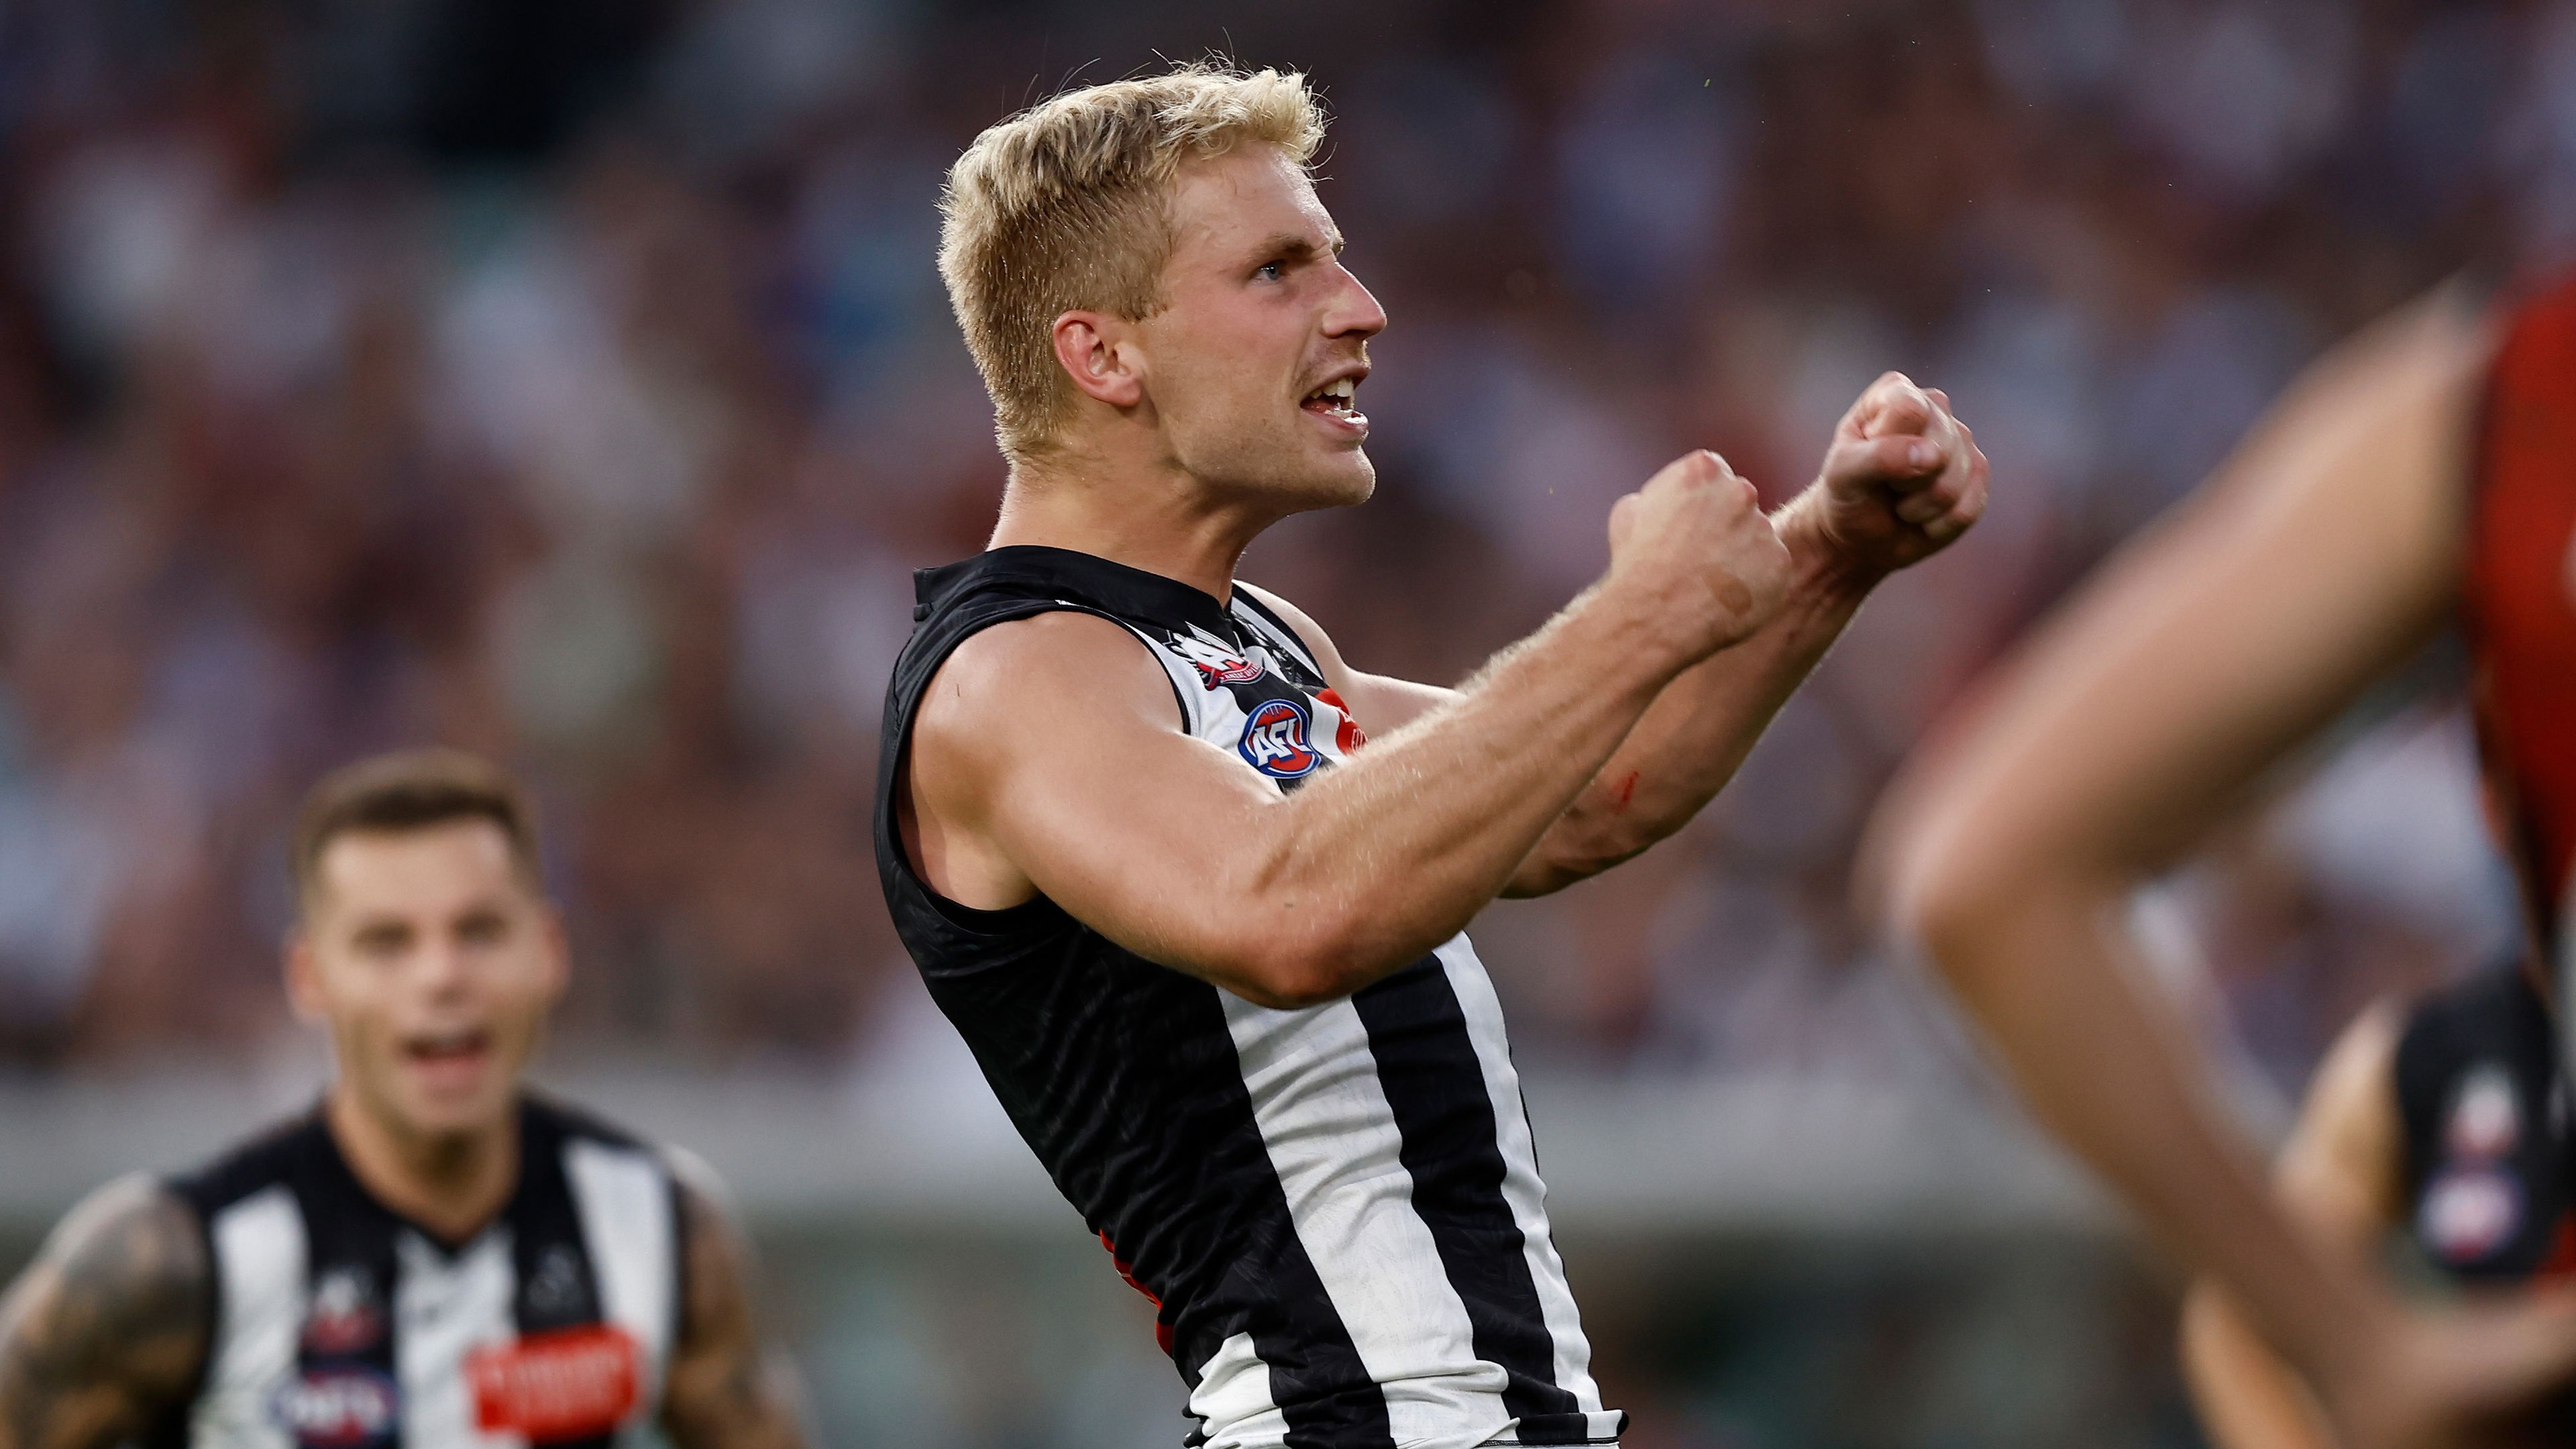 MELBOURNE, AUSTRALIA - APRIL 25: Billy Frampton of the Magpies celebrates a goal during the 2023 AFL Round 06 match between the Collingwood Magpies and the Essendon Bombers at the Melbourne Cricket Ground on April 25, 2023 in Melbourne, Australia. (Photo by Michael Willson/AFL Photos)